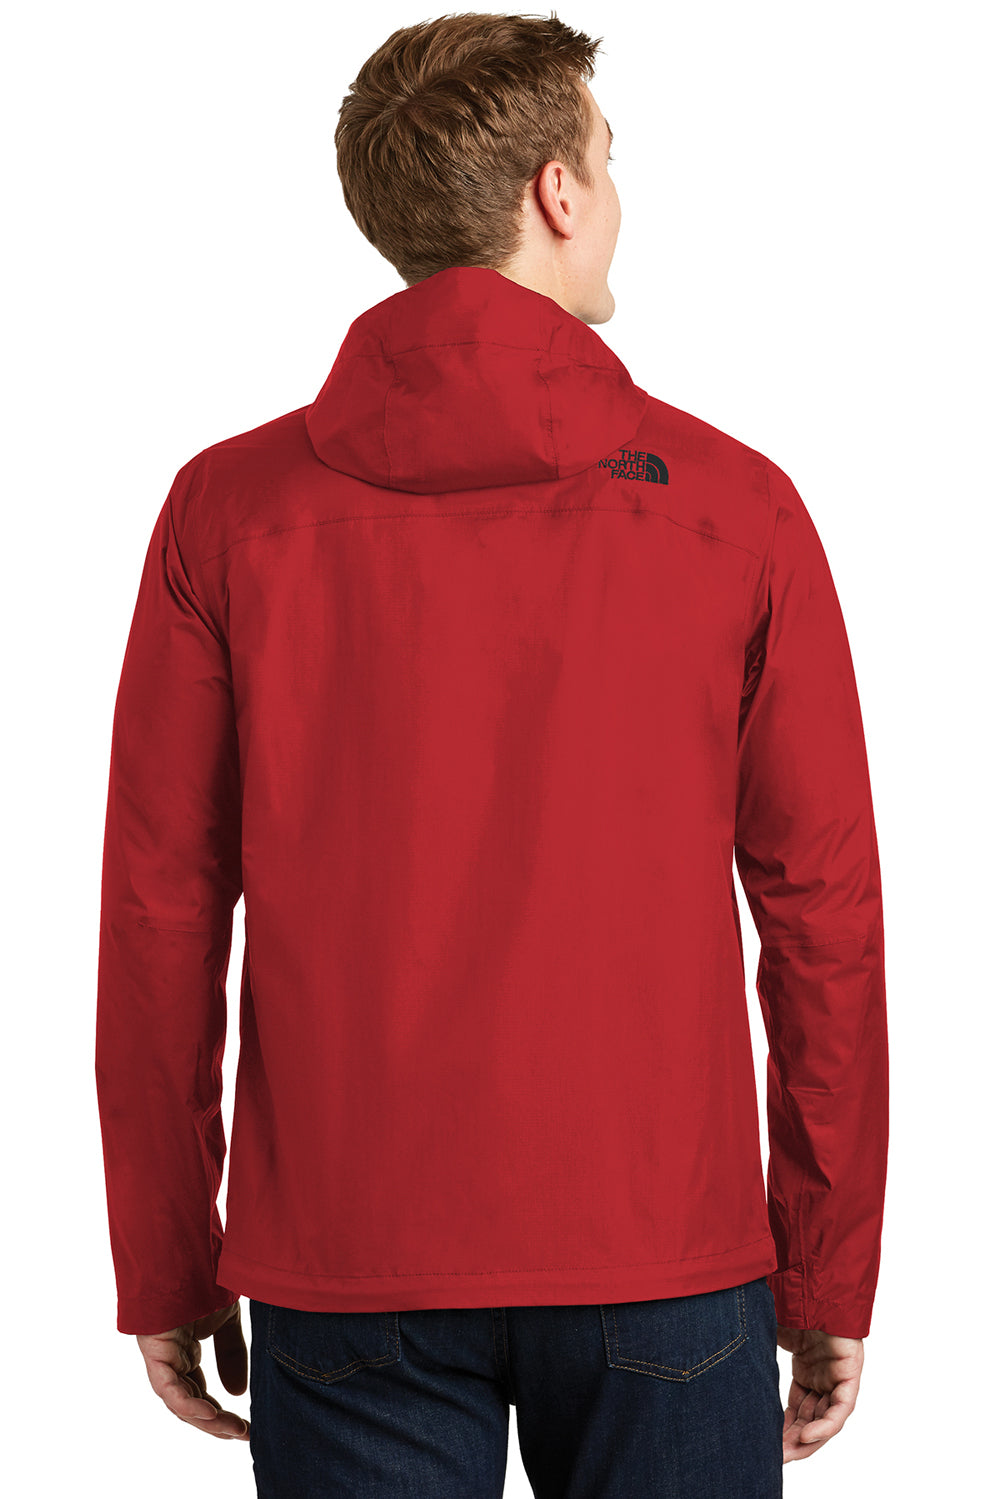 The North Face NF0A3LH4 Mens DryVent Waterproof Full Zip Hooded Jacket Rage Red Back